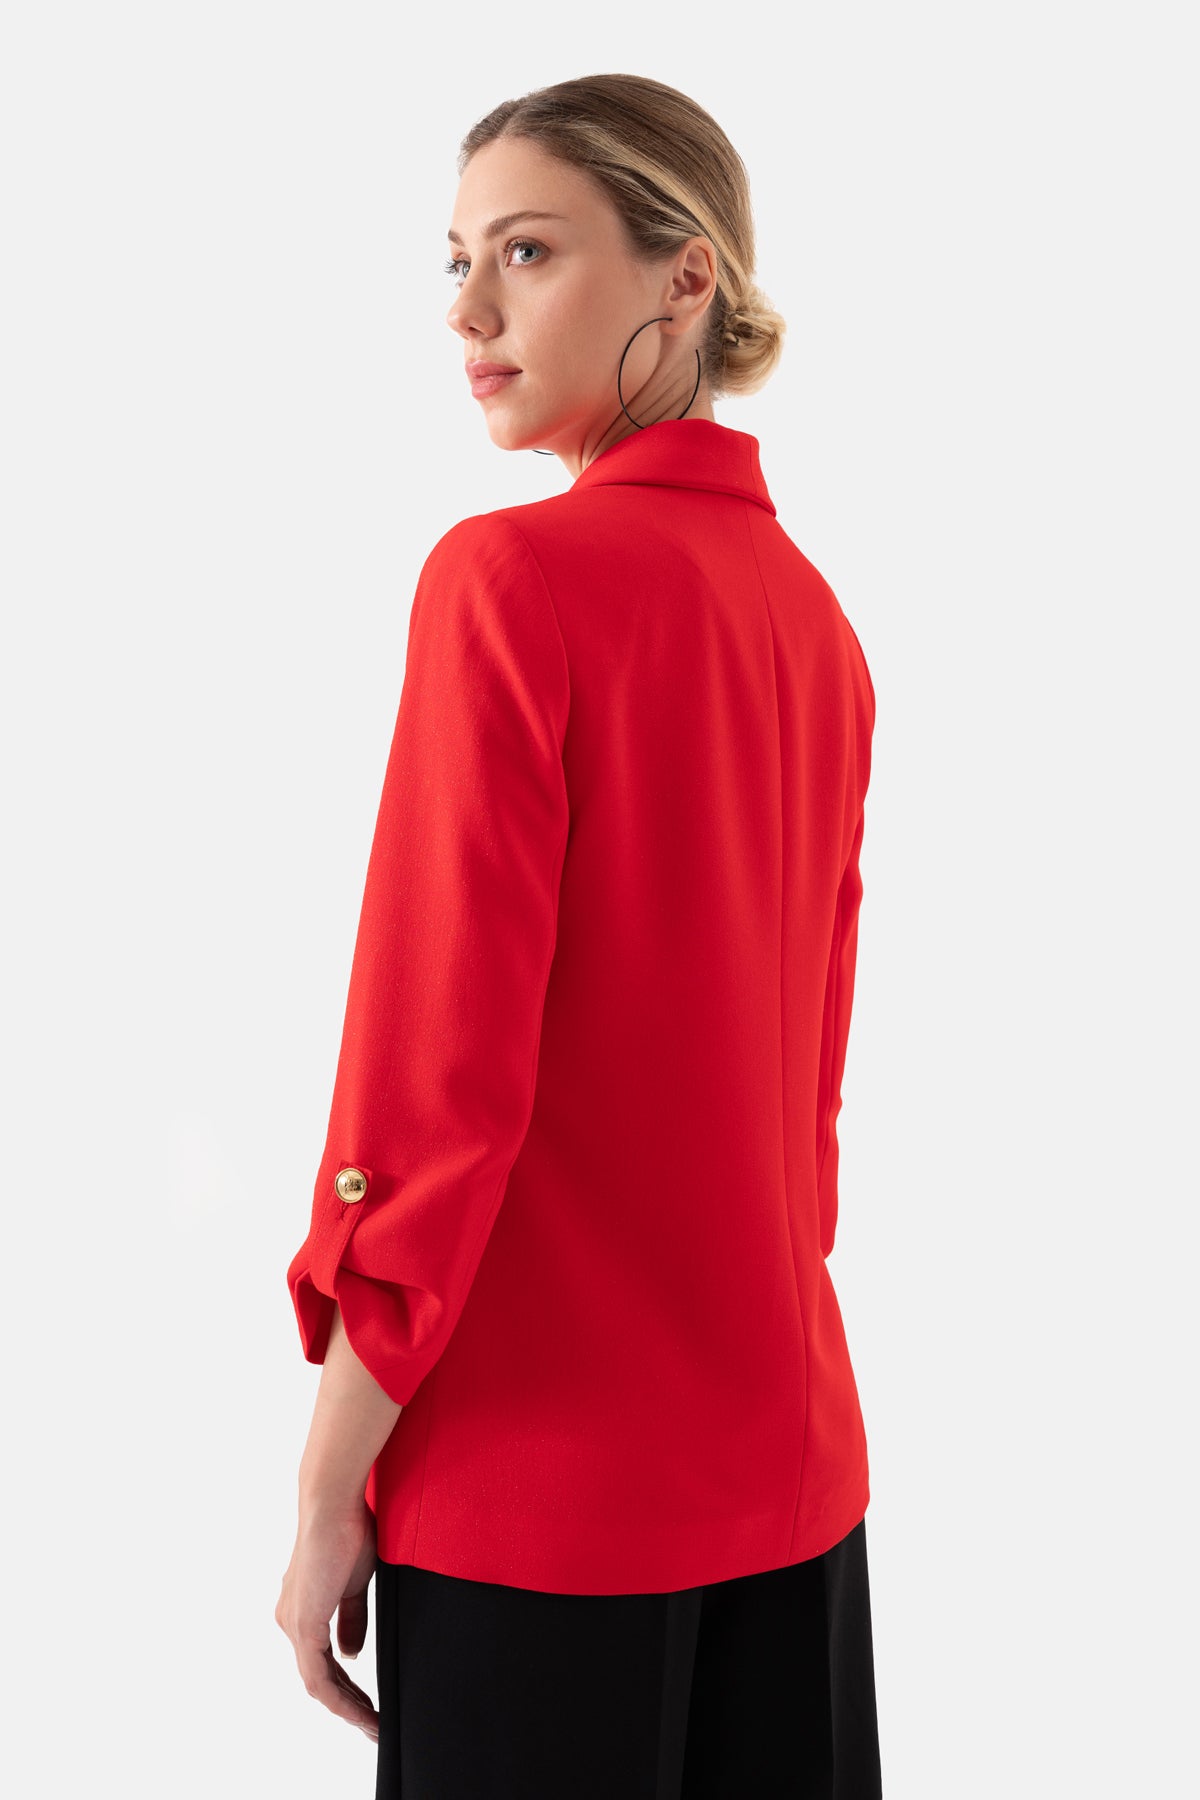 Red Shawl Collar Double Breasted Blazer Women's Jacket